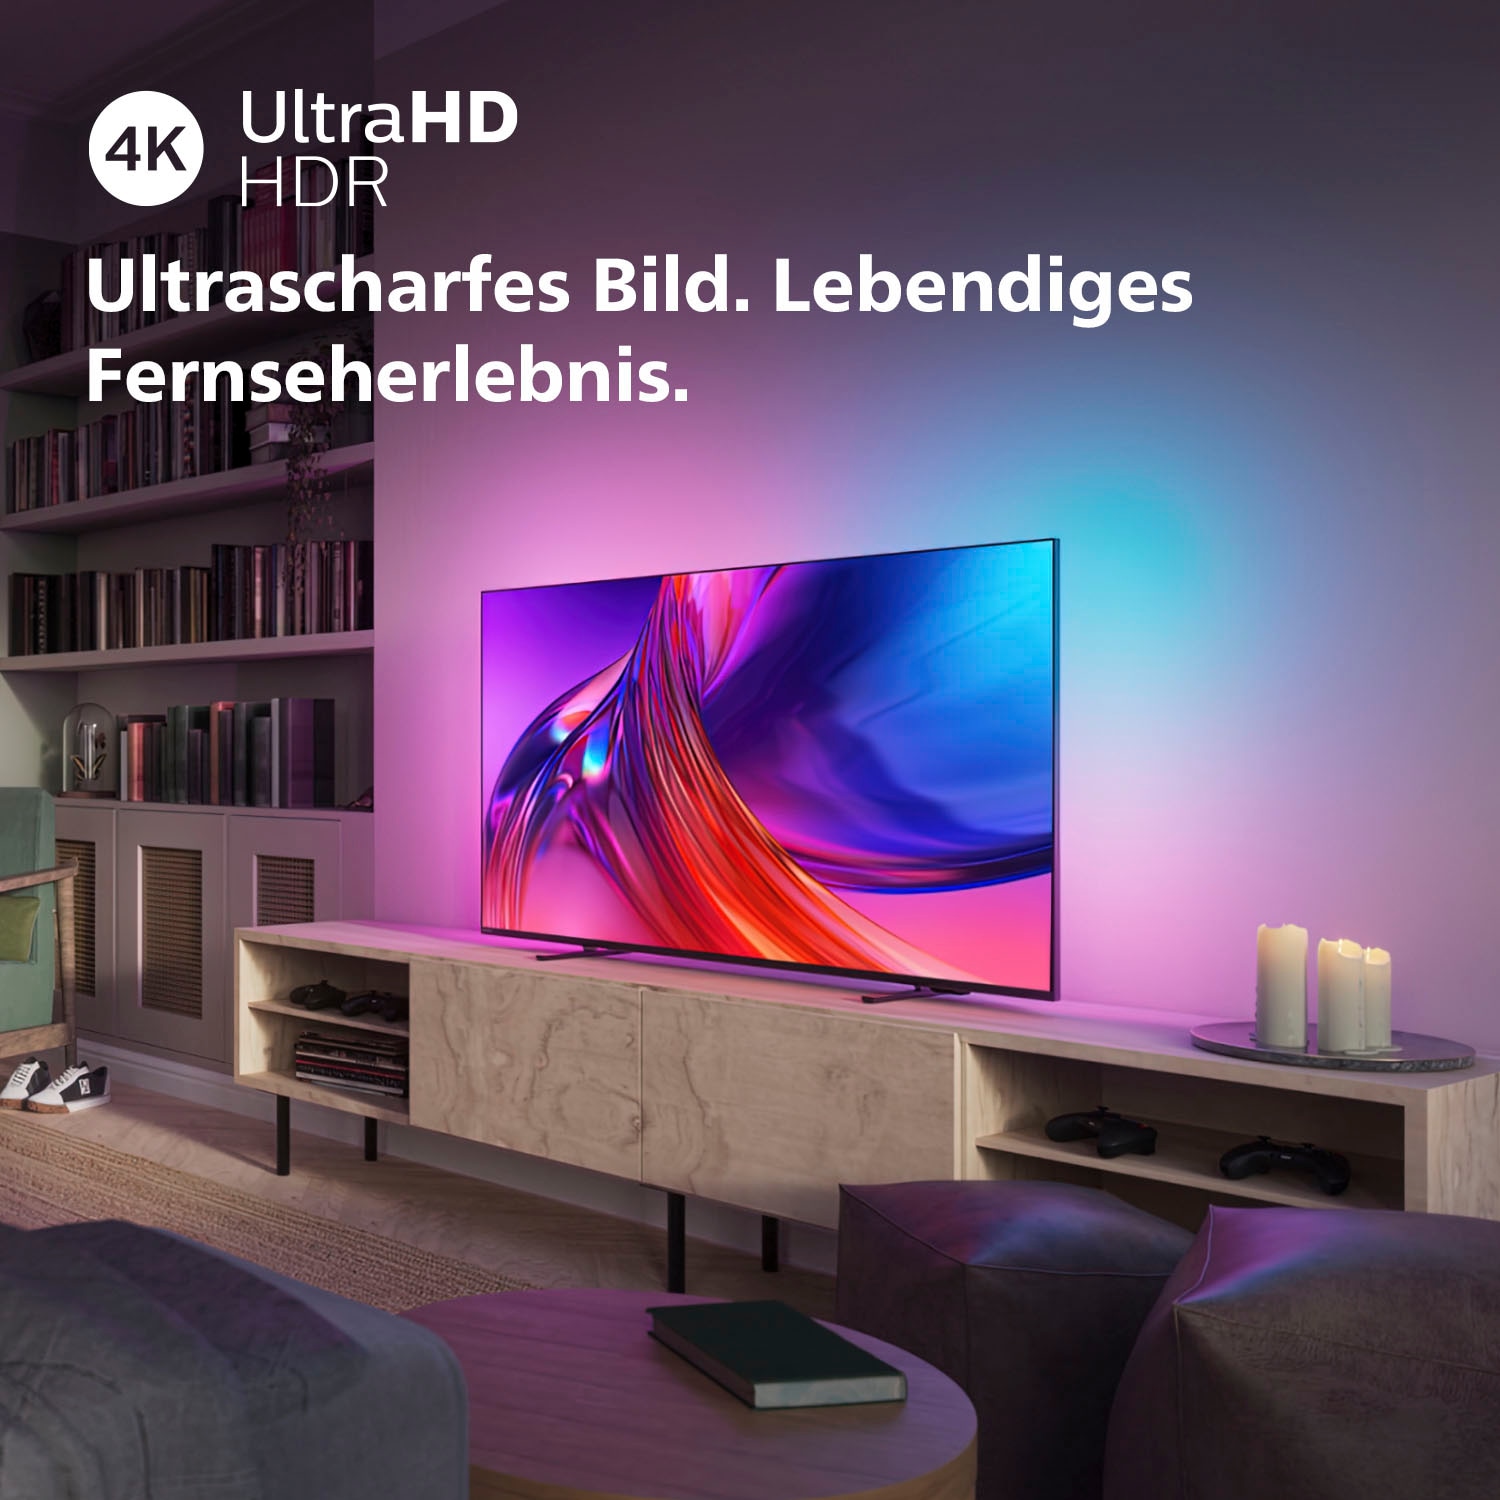 Philips LED-Fernseher, 164 cm/65 Zoll, 4K Ultra HD, Android TV-Google TV-Smart-TV, 3-seitiges Ambilight